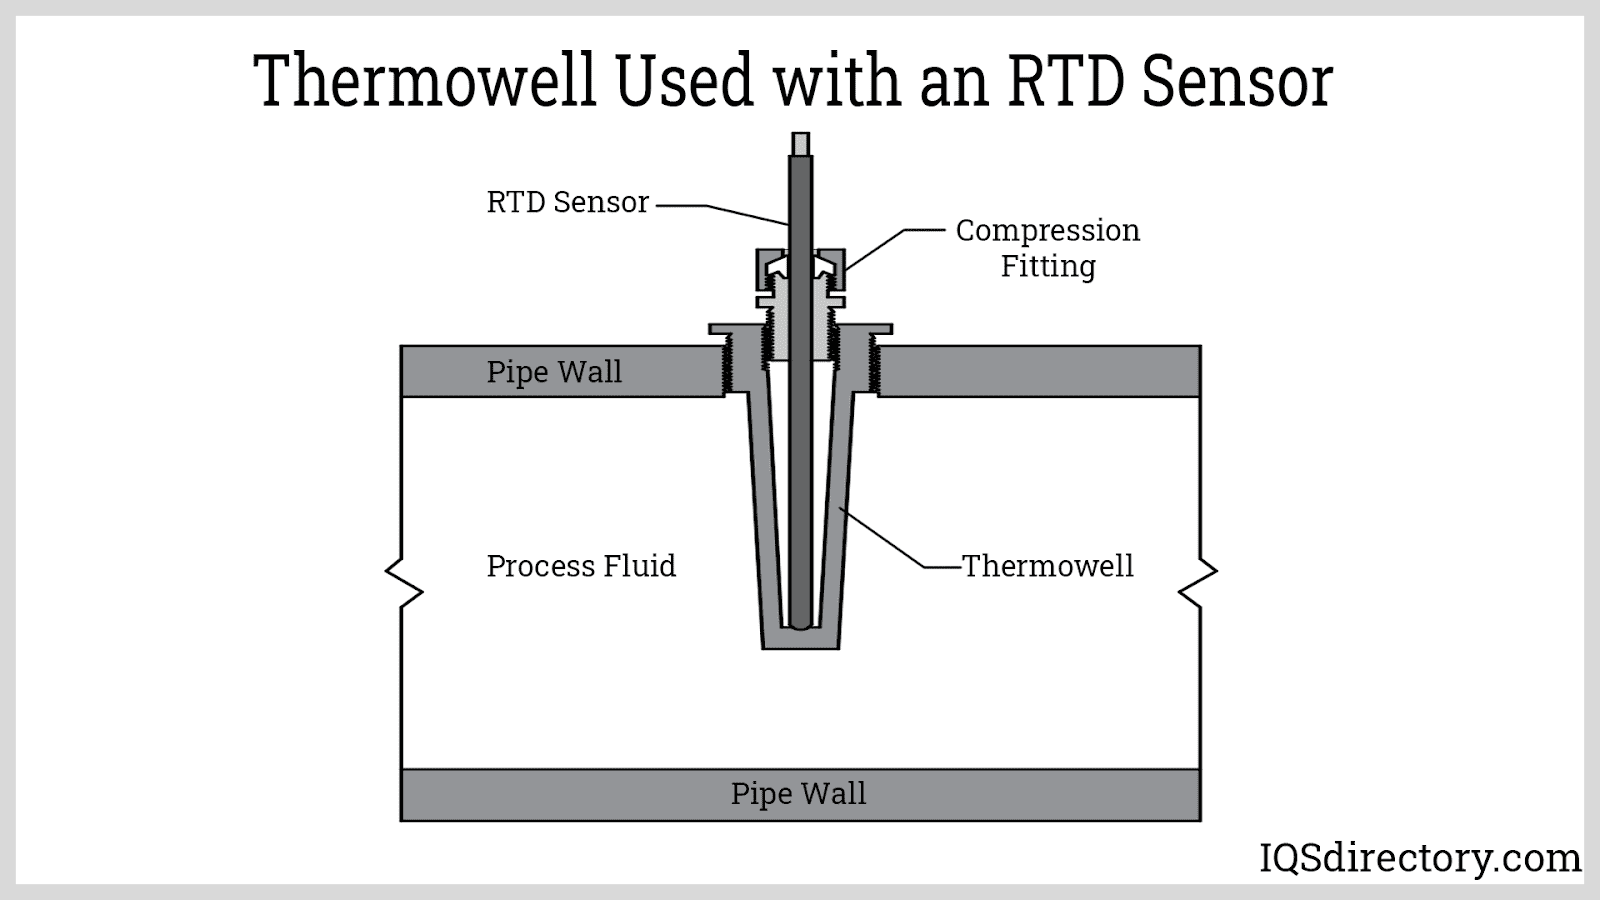 https://www.iqsdirectory.com/articles/thermocouple/rtd-sensors/thermowell-used-with-an-rtd-sensor.png